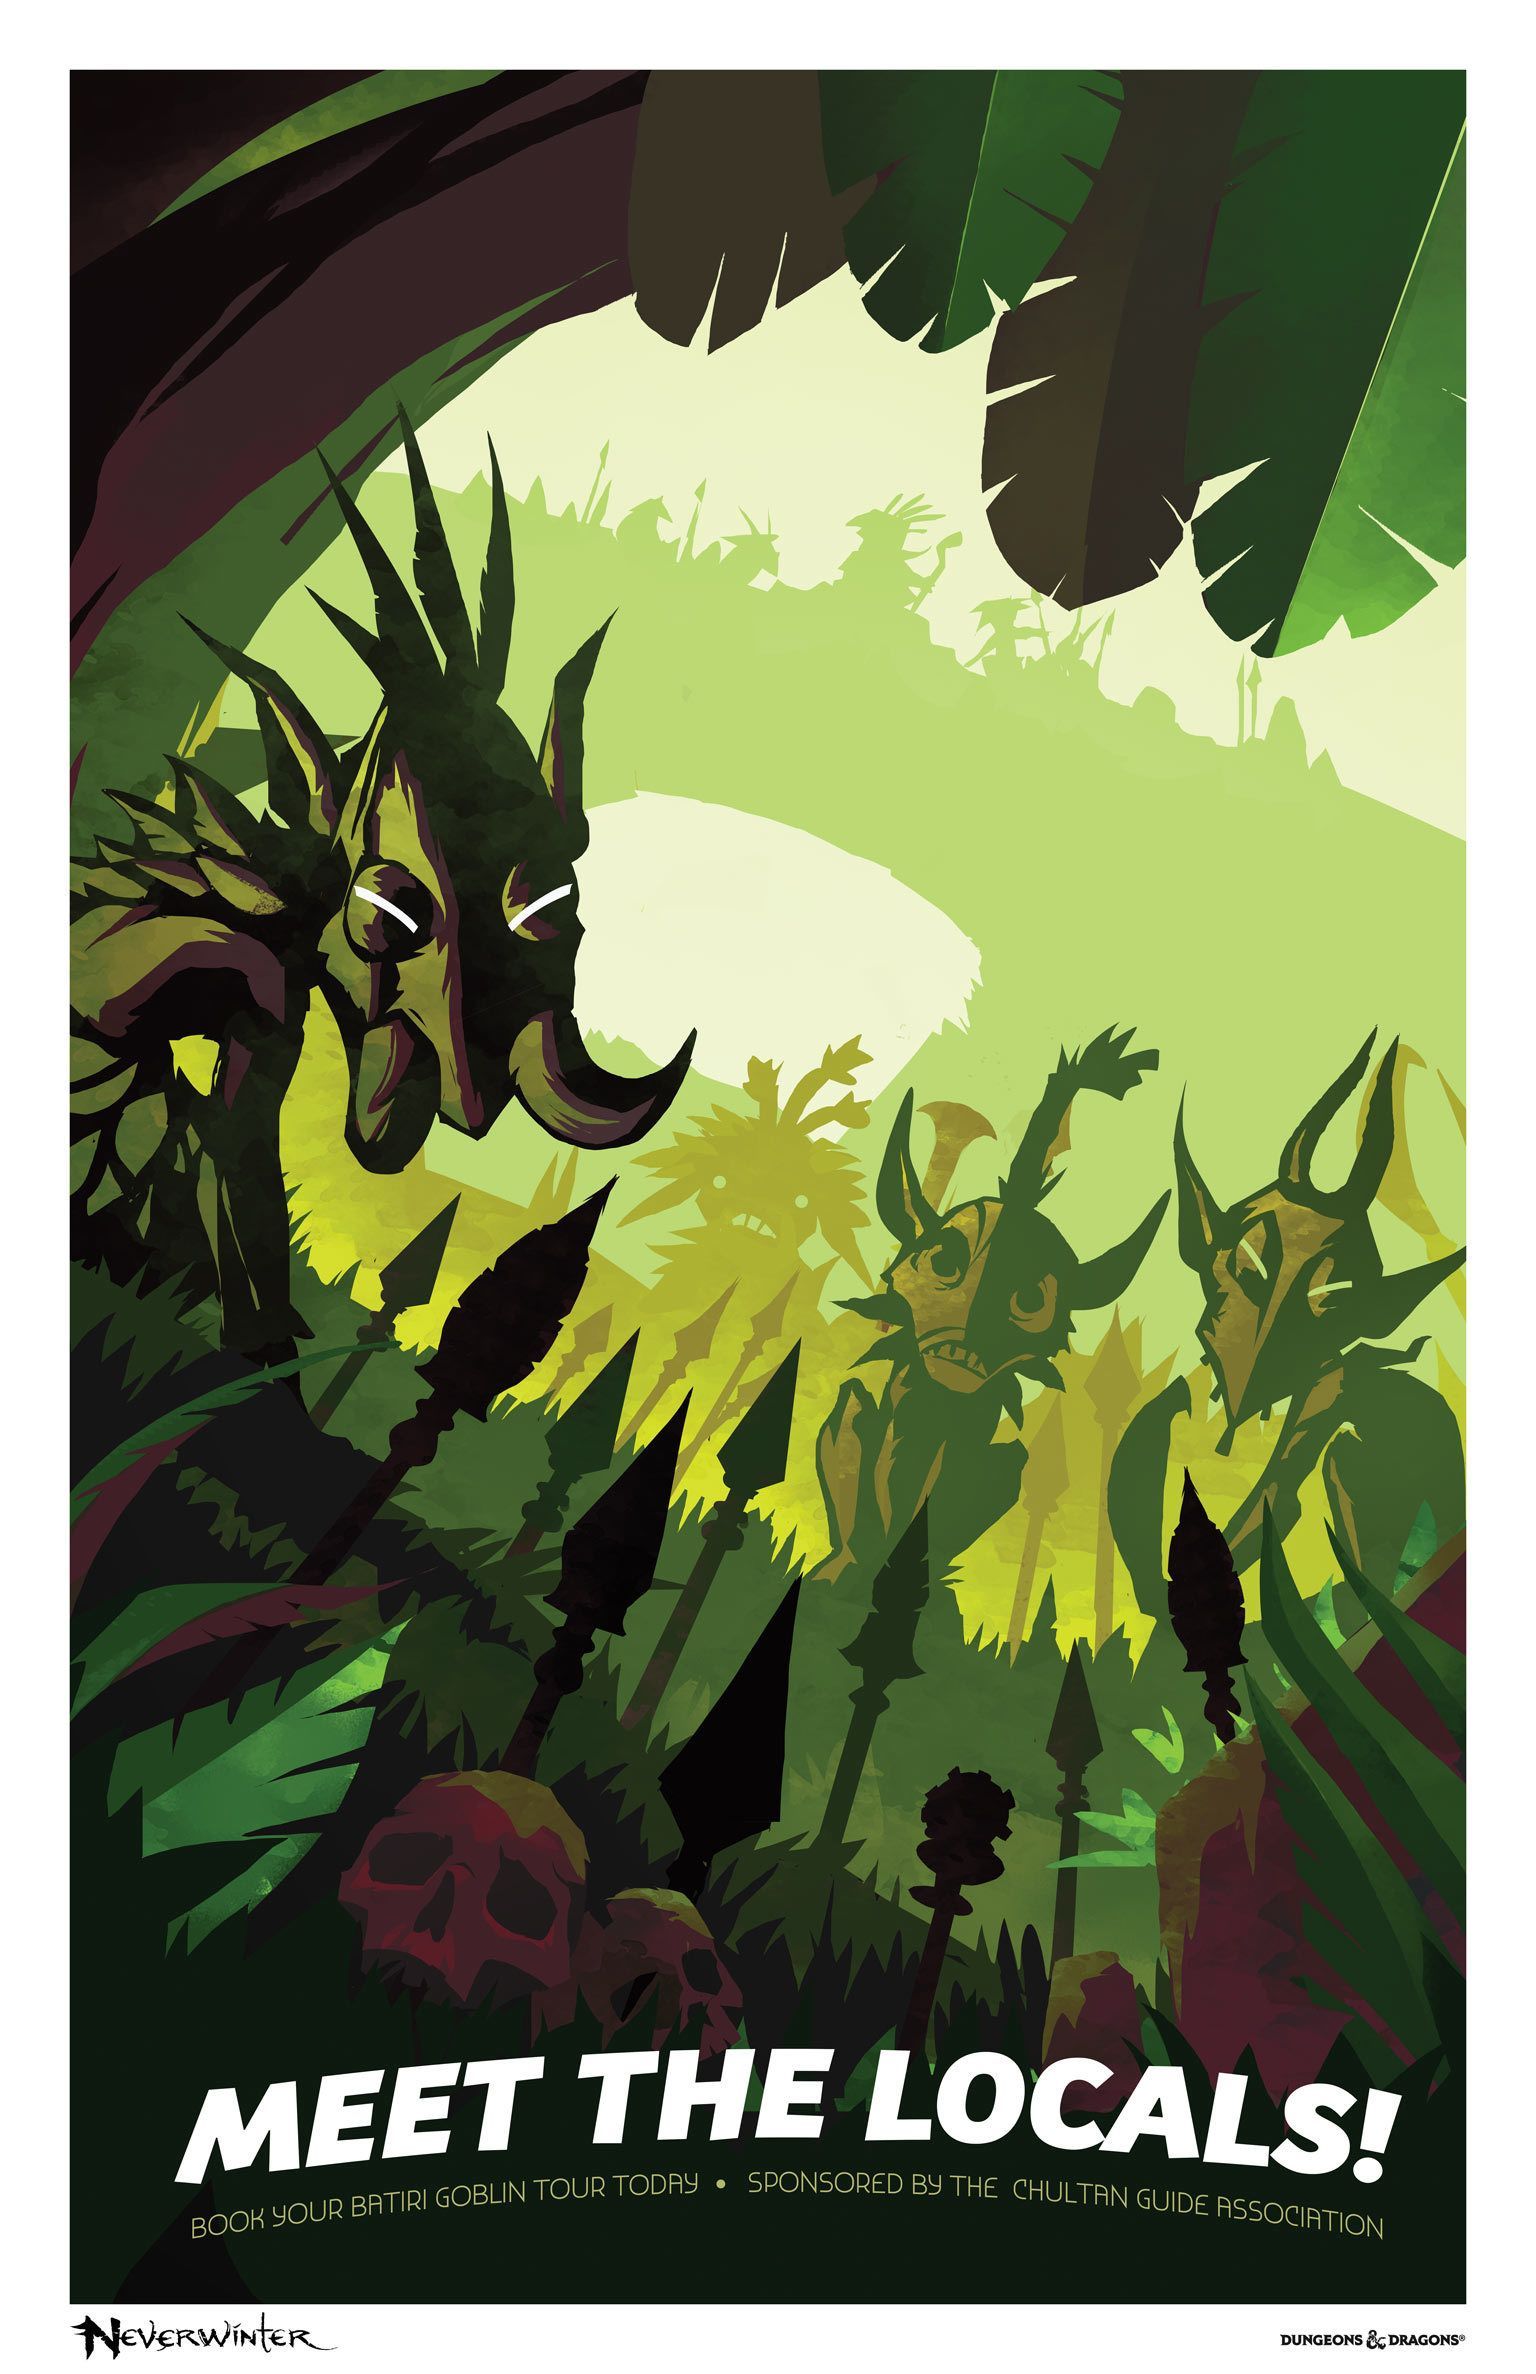 Dragon+. Travel posters, Dungeons and dragons, Vintage travel posters